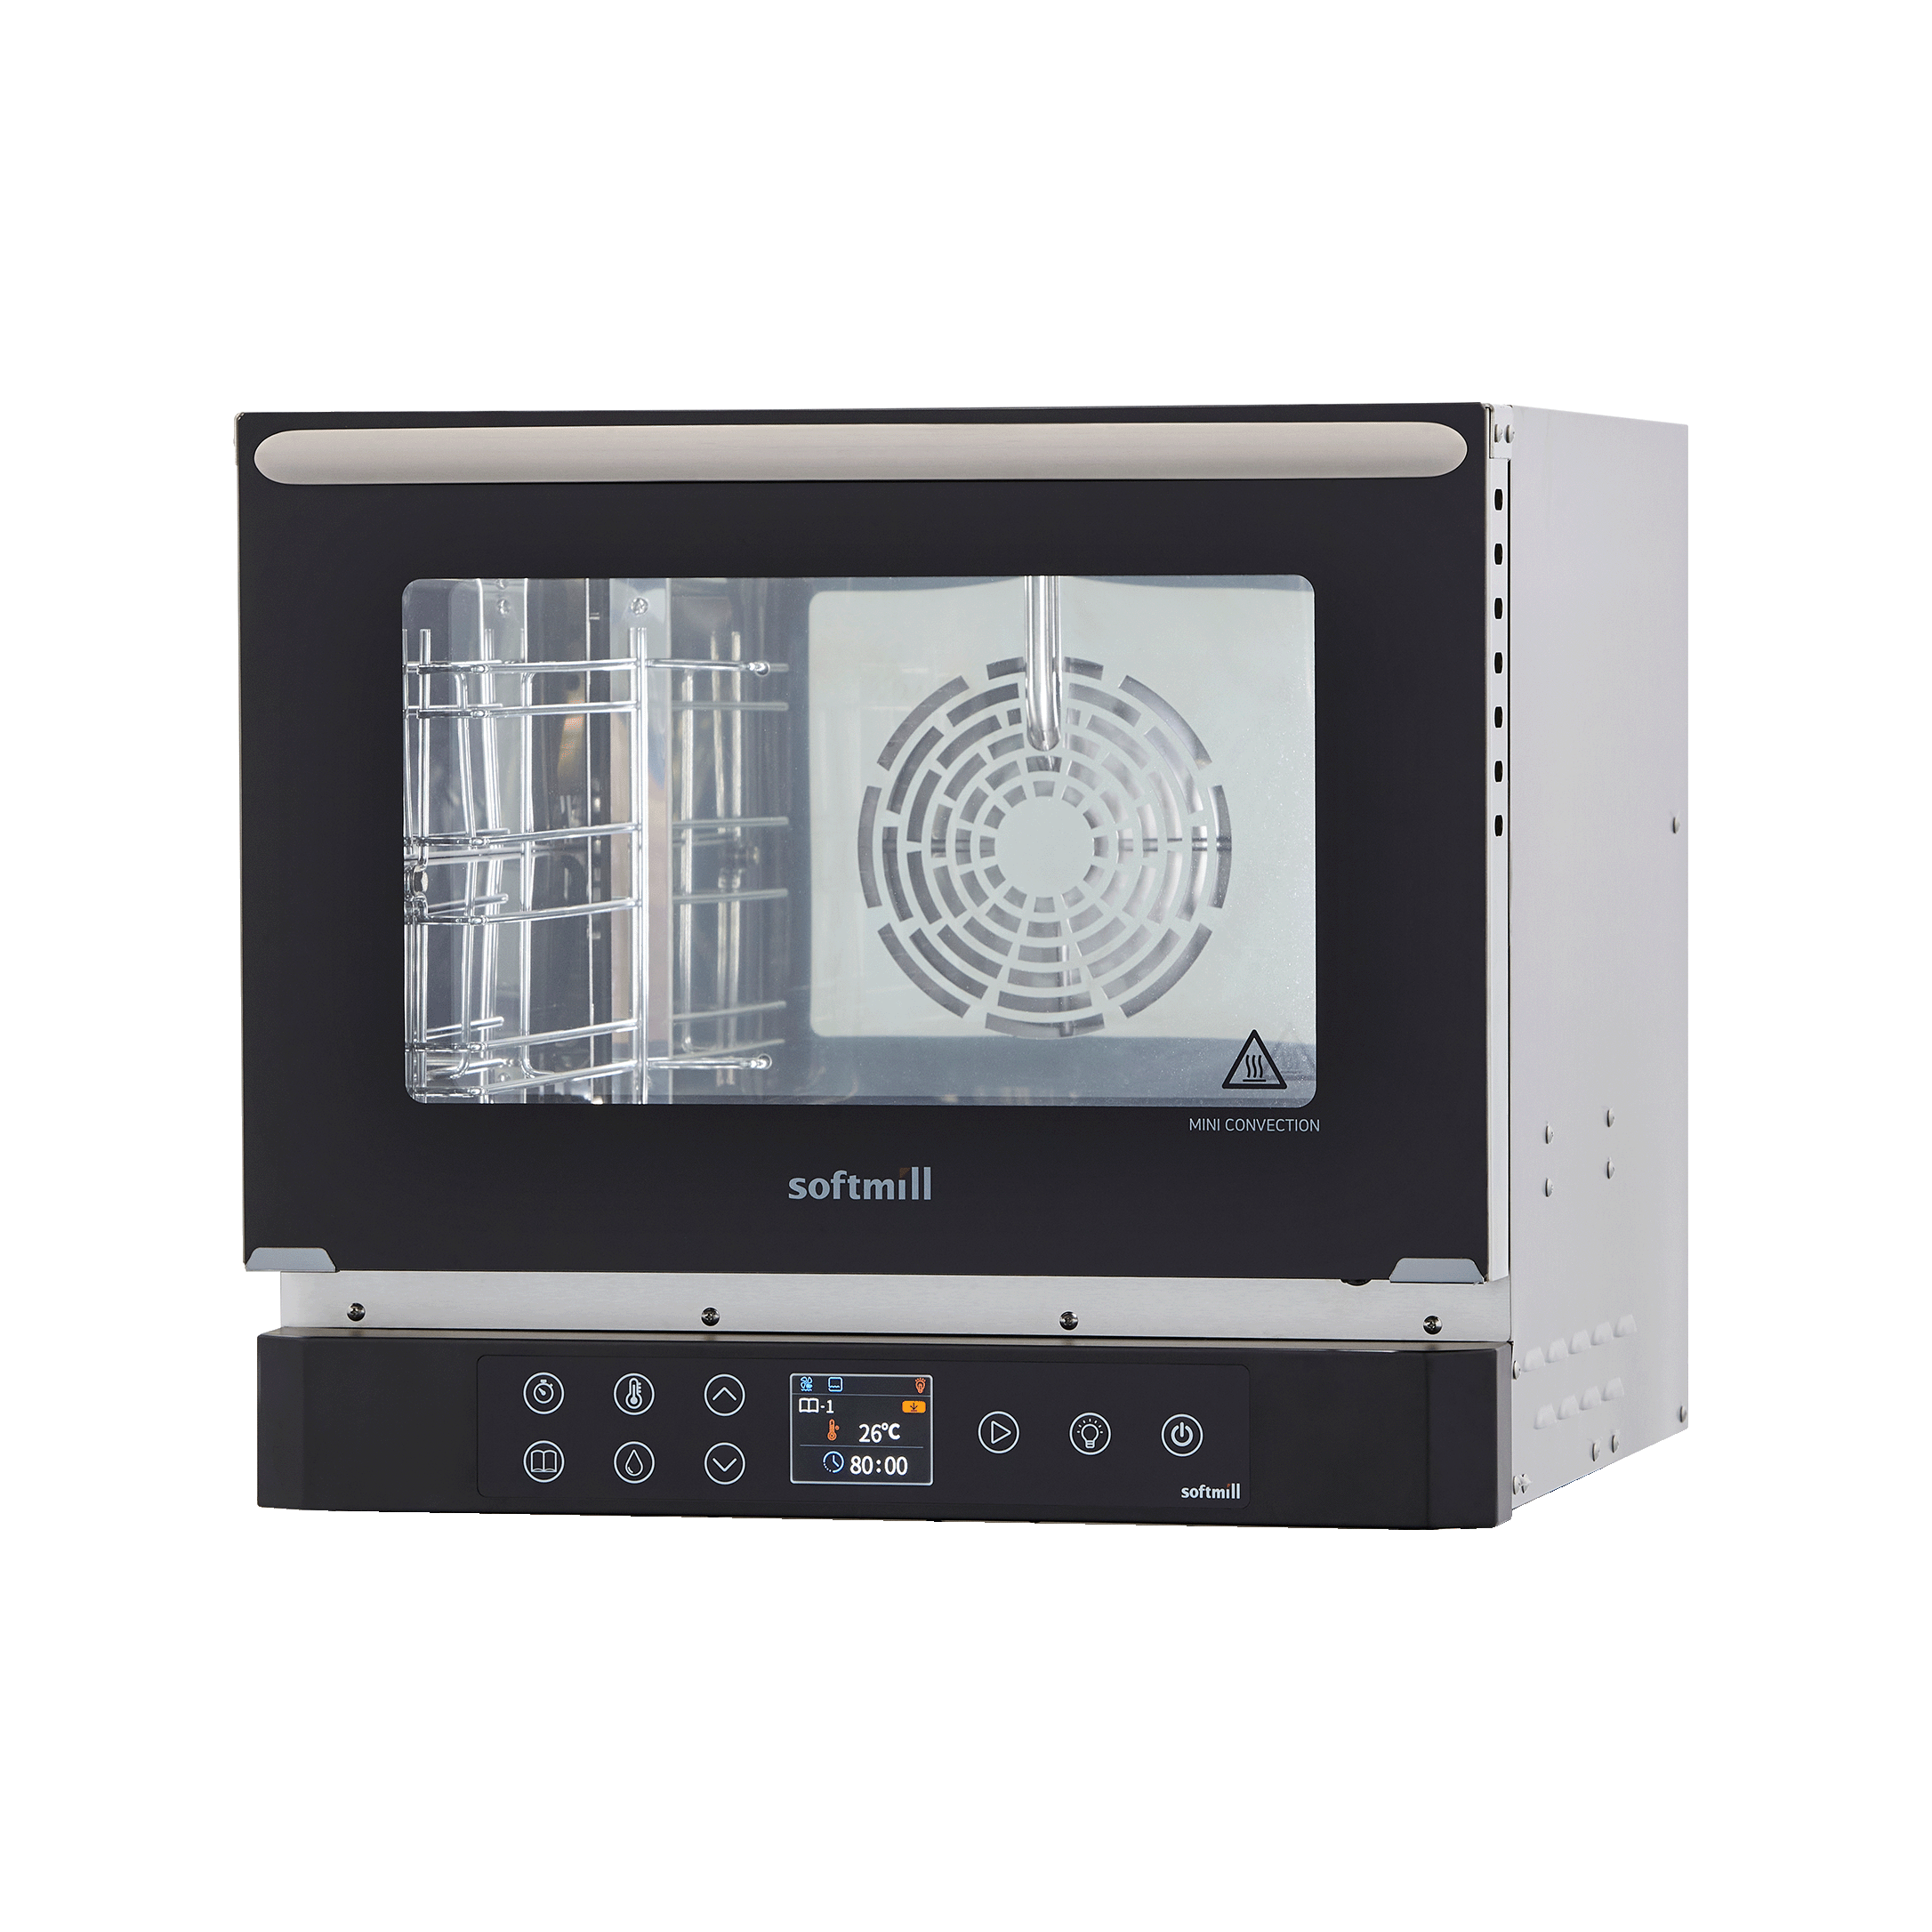 Mini Convection Oven(3 Tray/4 Tray) size up images